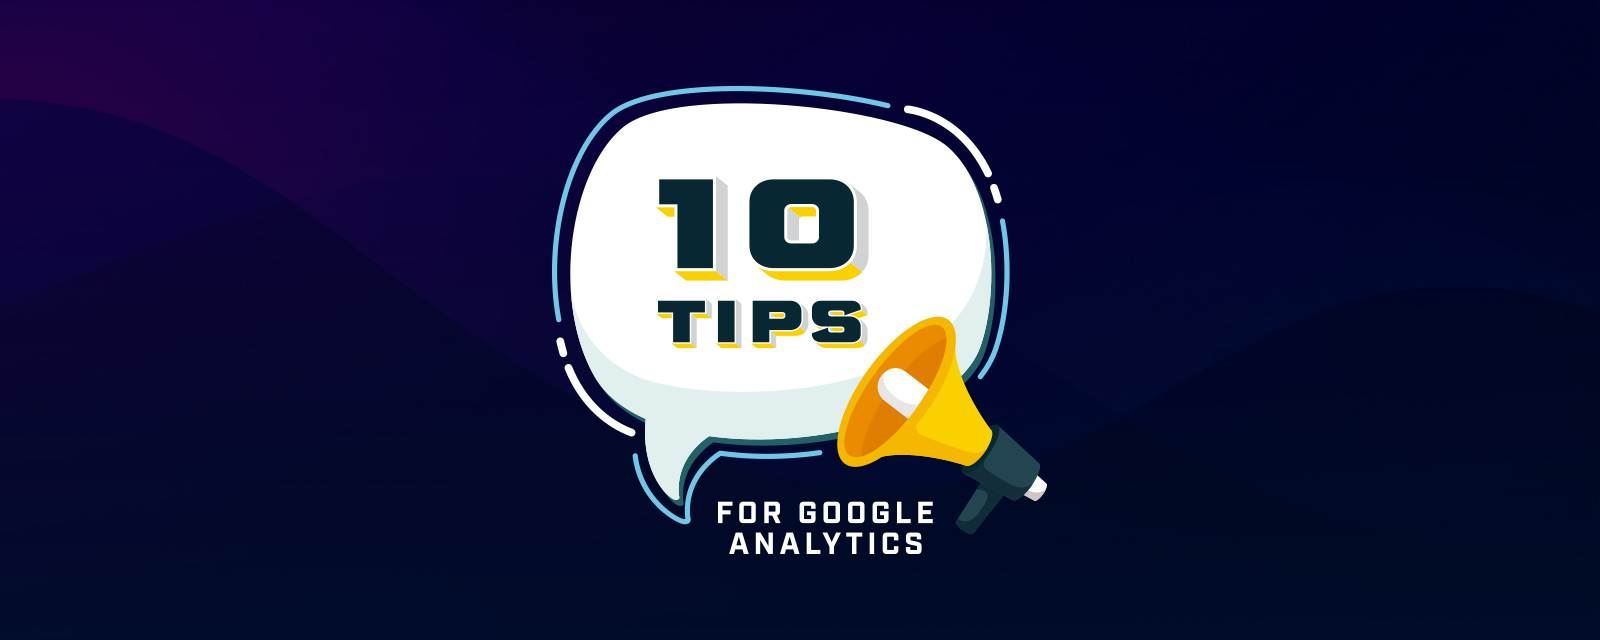 10-tips-featured.jpg